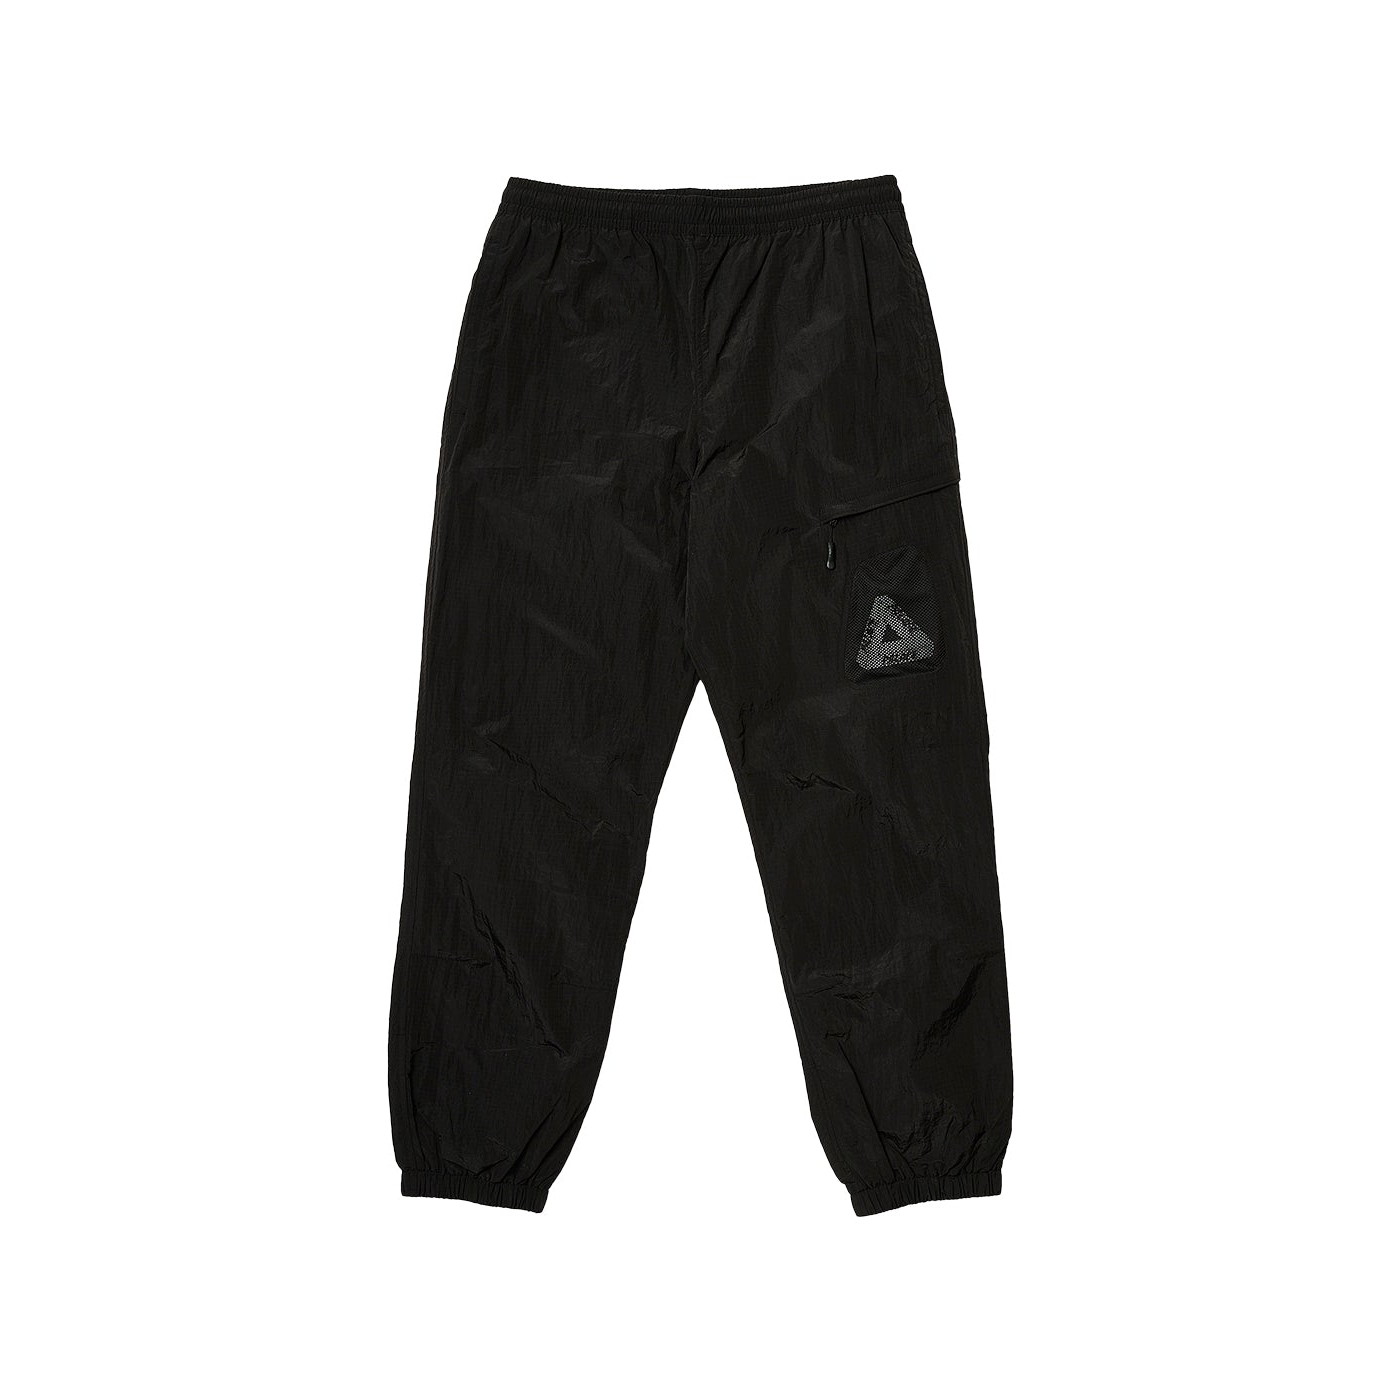 Thumbnail Y-RIPSTOP SHELL JOGGER BLACK one color